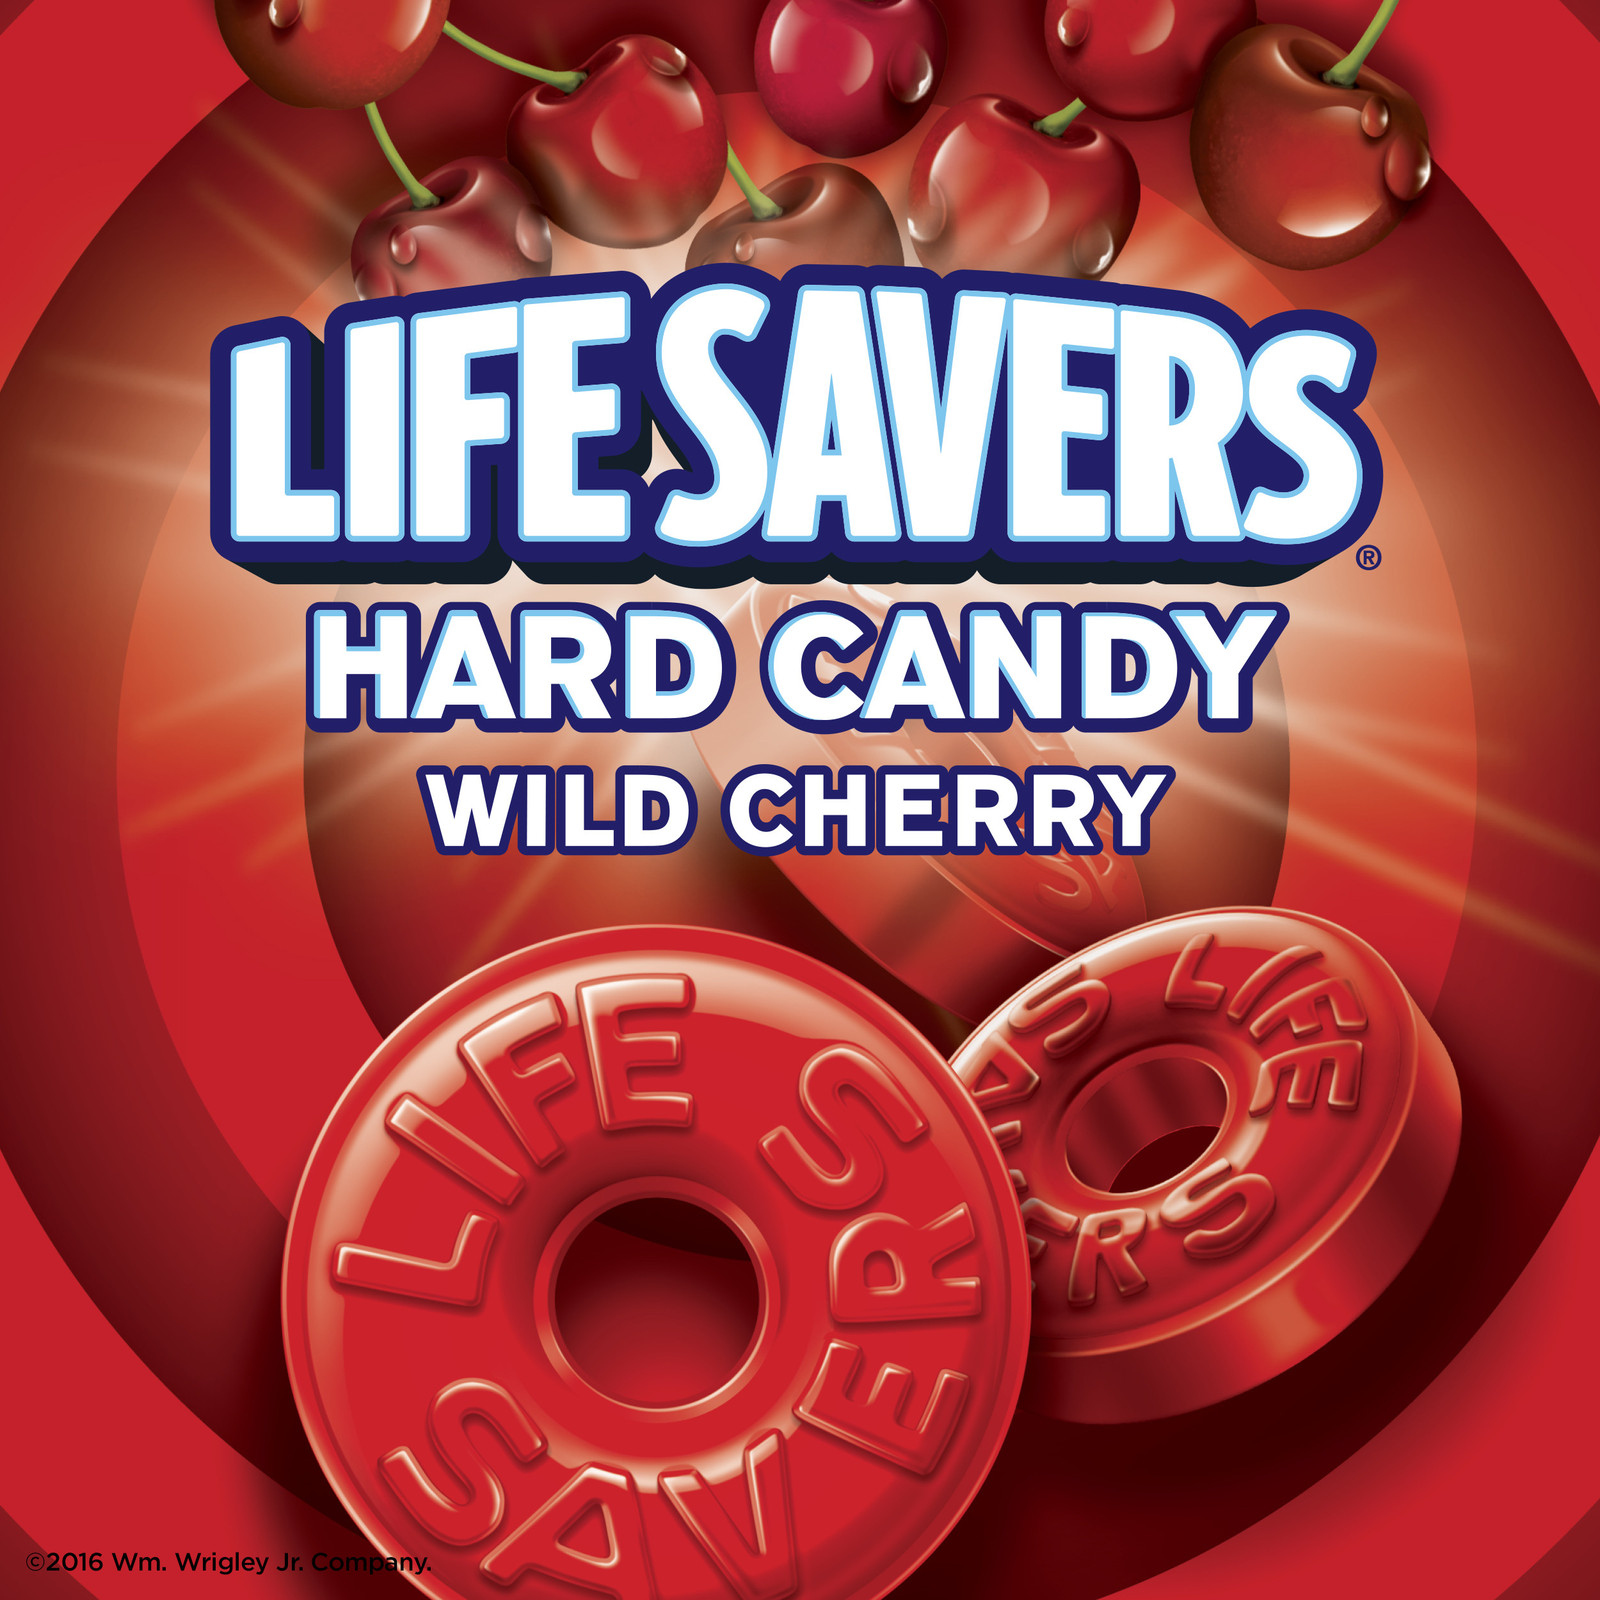 Lifesaver - Wild Cherry 6 LBs - Individually Wrapped Hard Candy